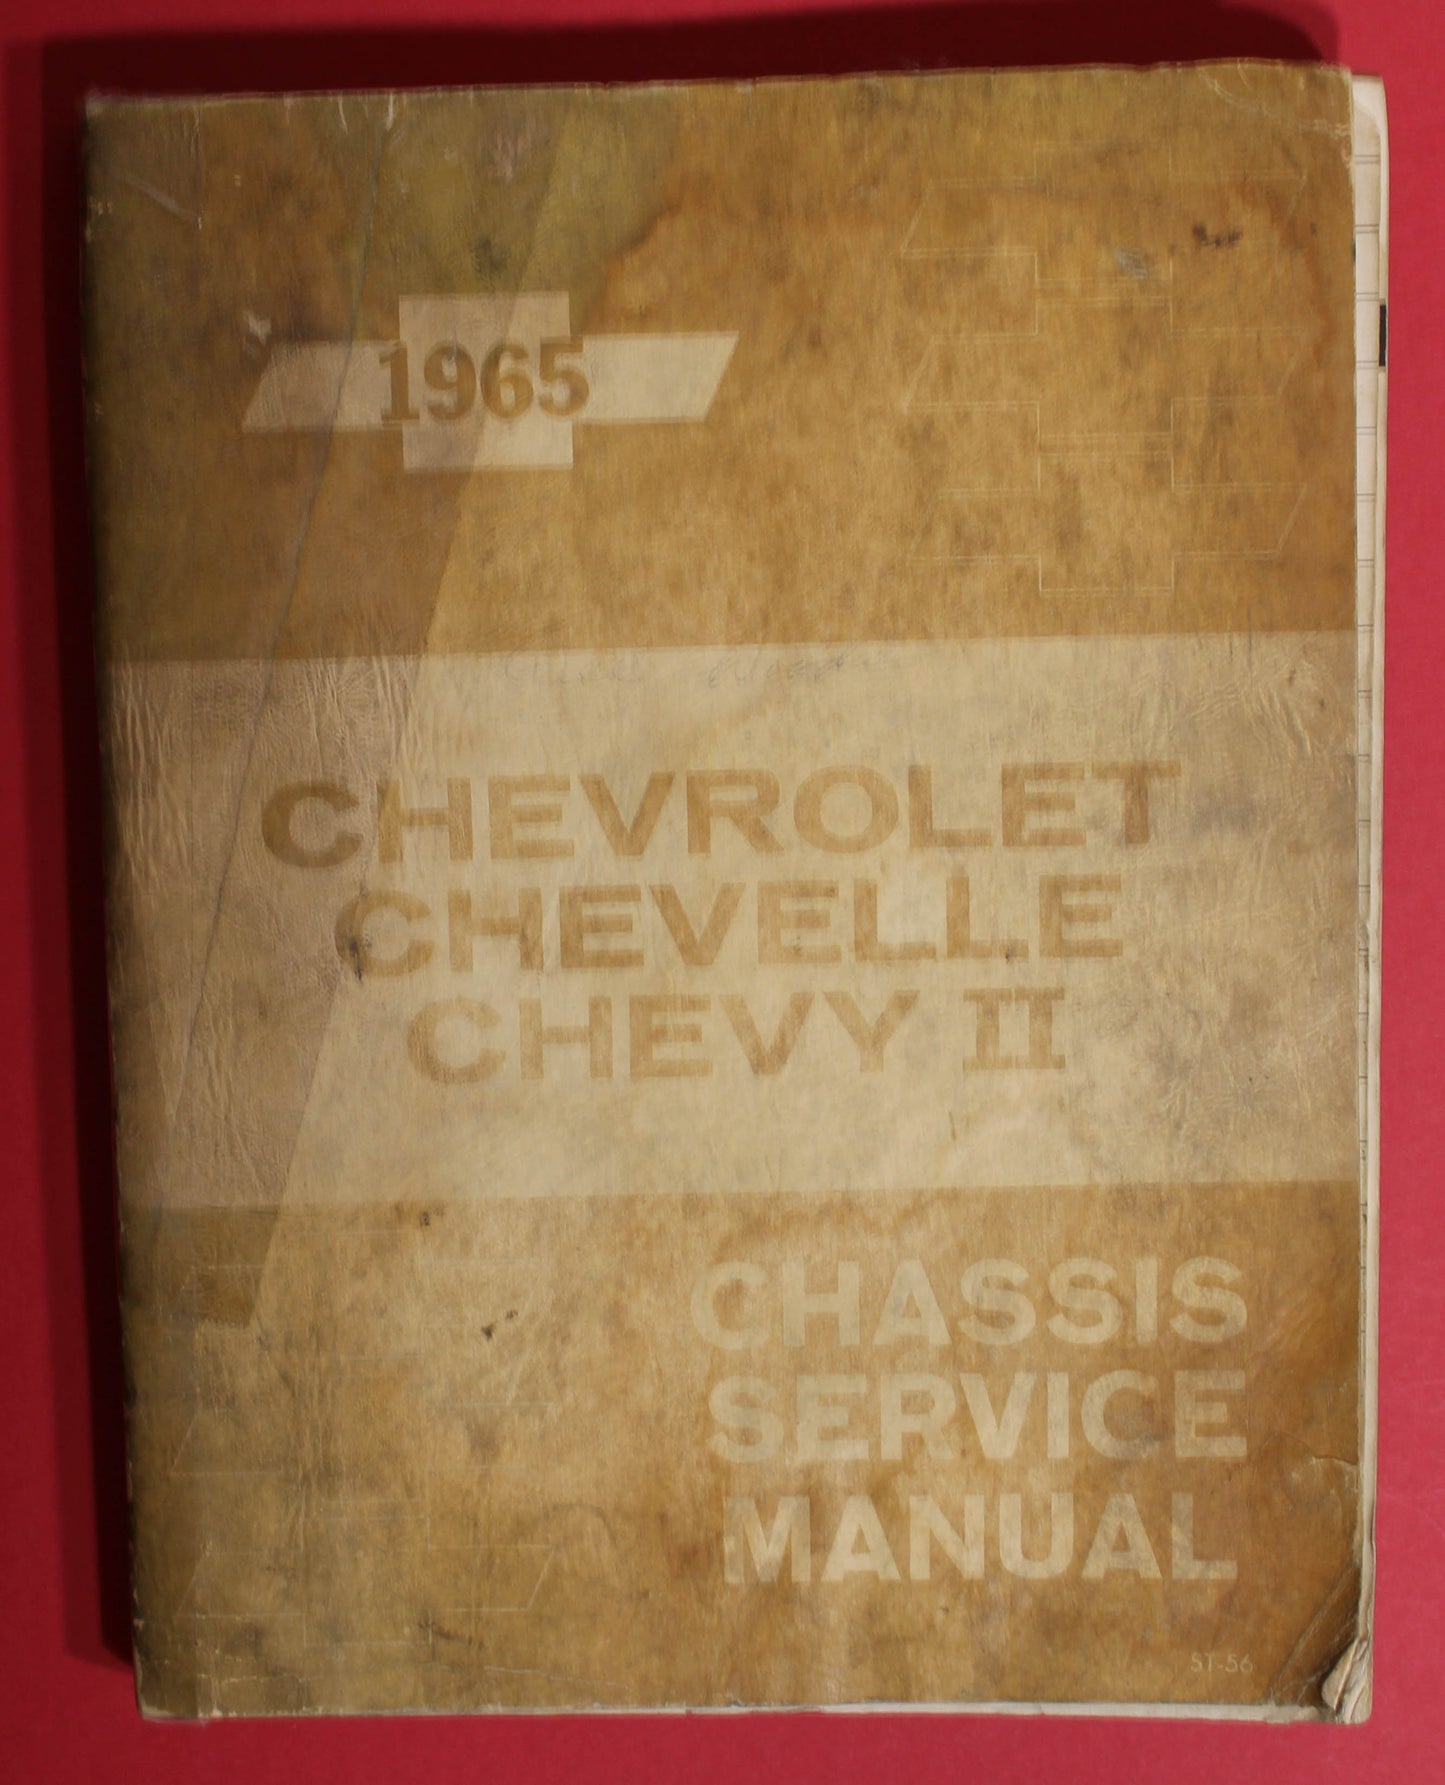 1965 CHEVROLET CHEVELLE CHEVY II CHASSIS SERVICE MANUAL